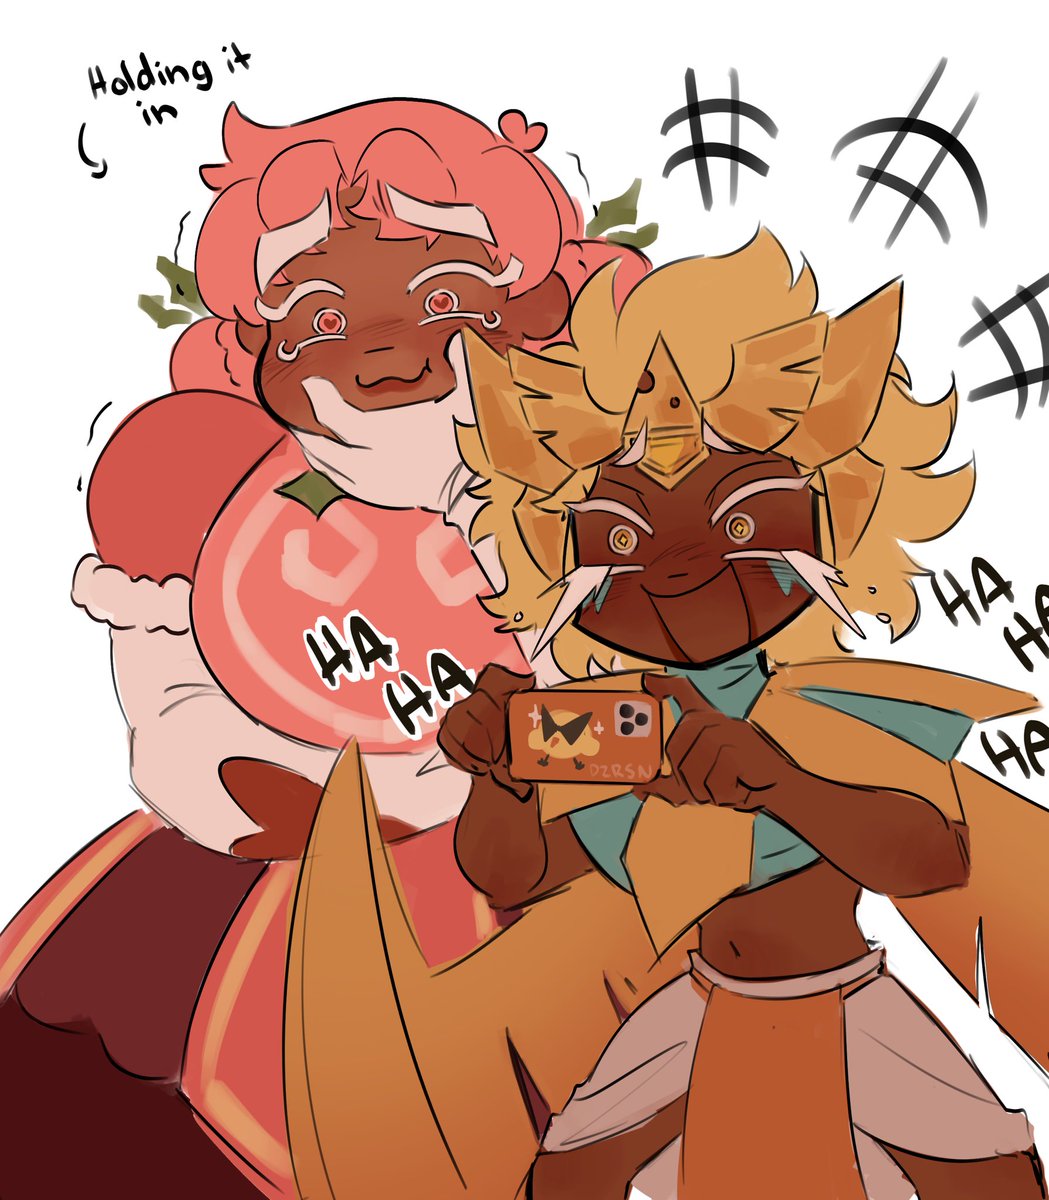 siblings who hate each other forced to make peace against their own will

#cookierun #cookierunkingdom